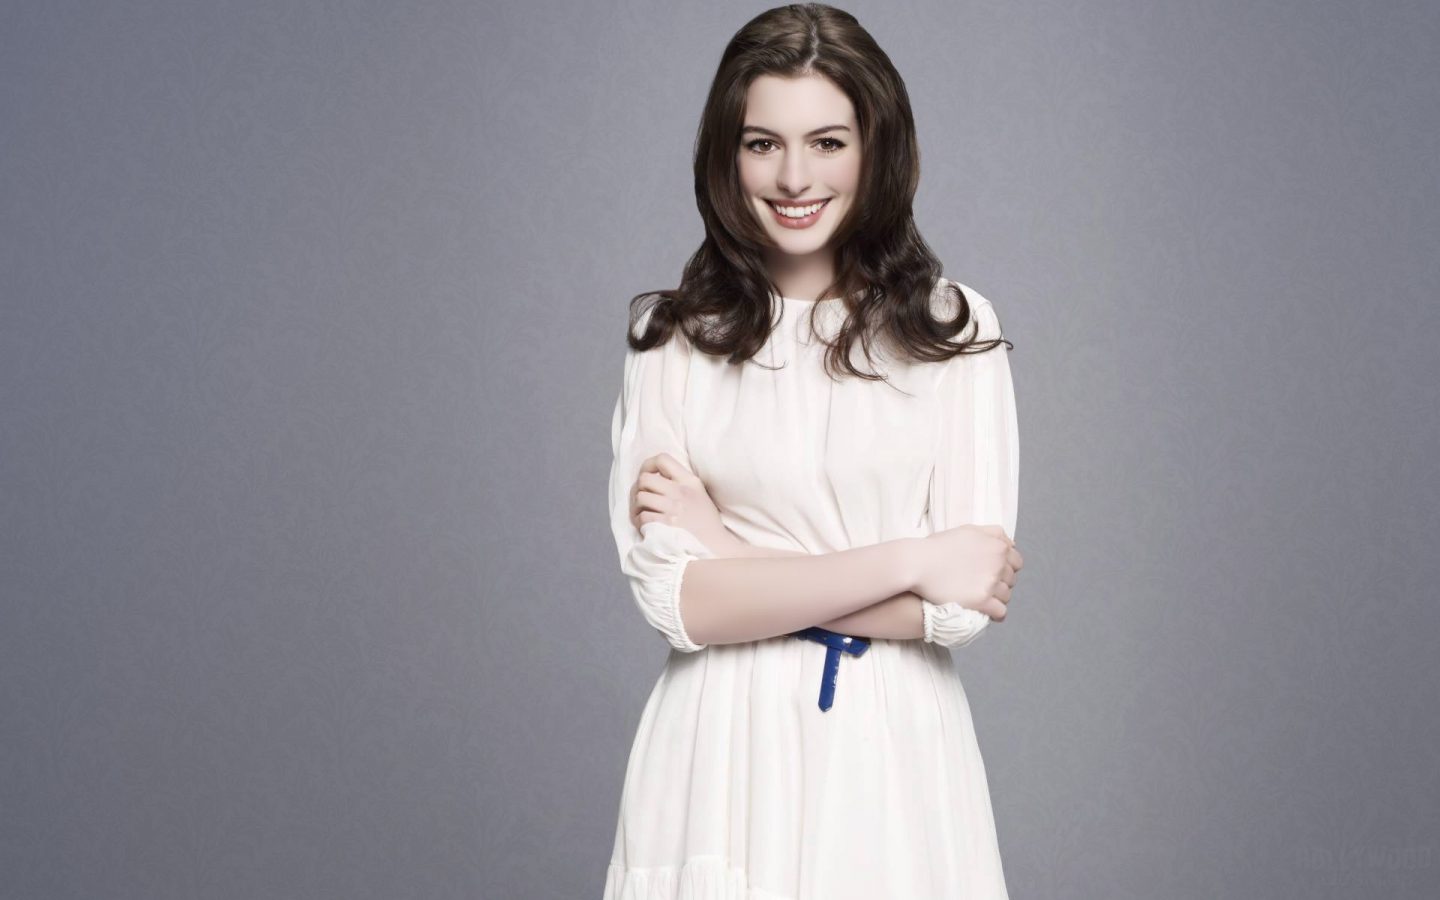 Cute Anne Hathaway for 1440 x 900 widescreen resolution